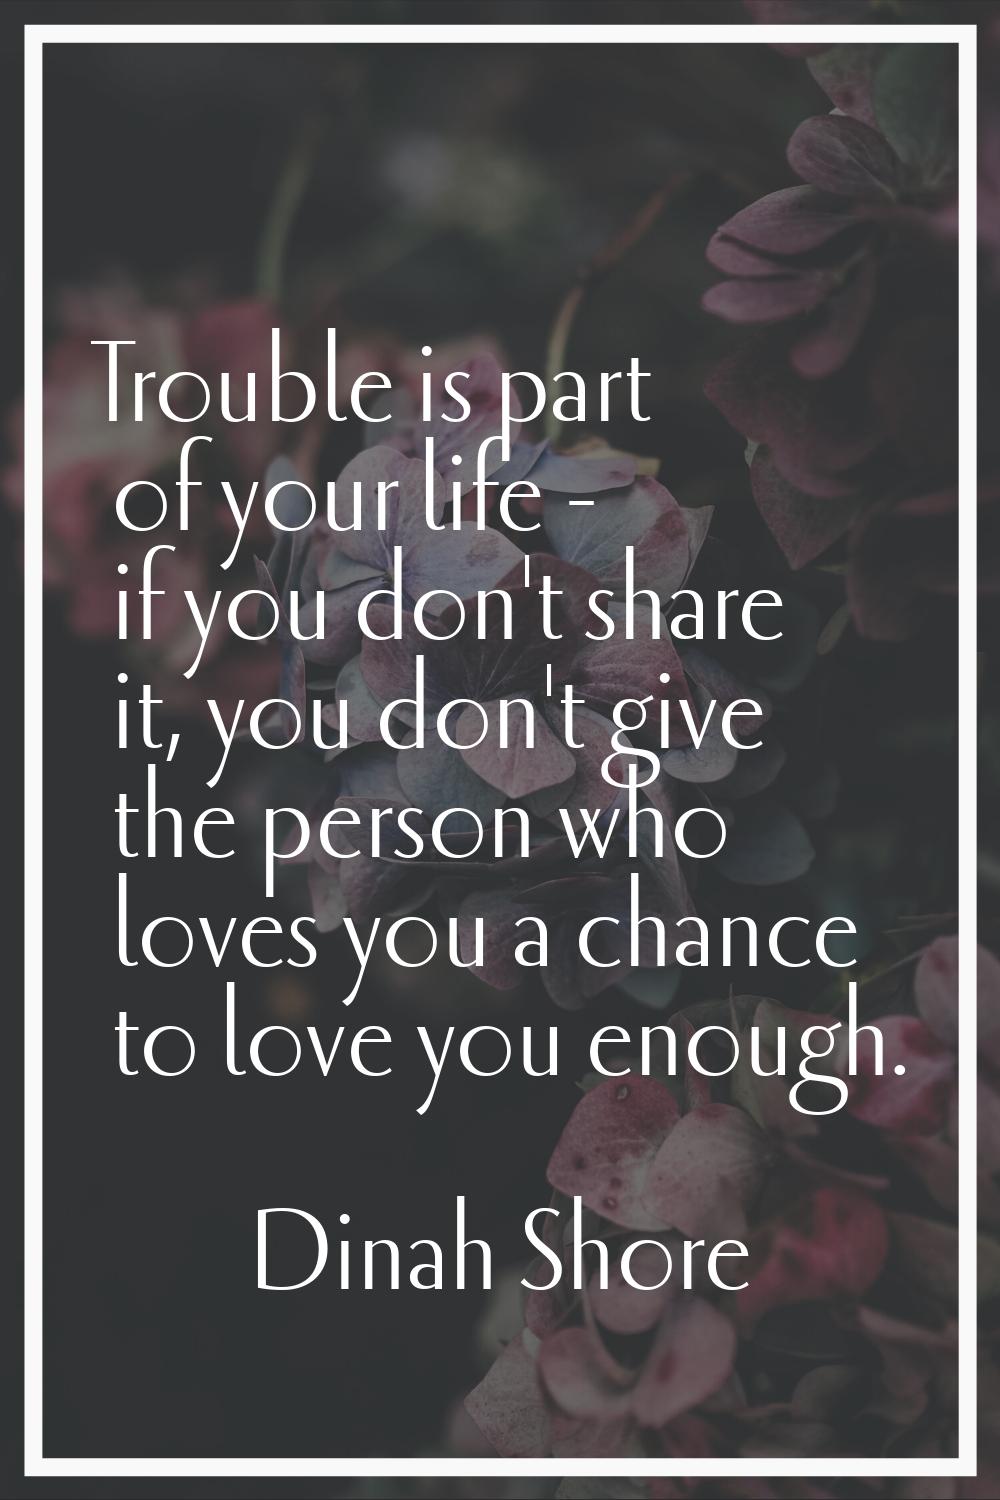 Trouble is part of your life - if you don't share it, you don't give the person who loves you a cha